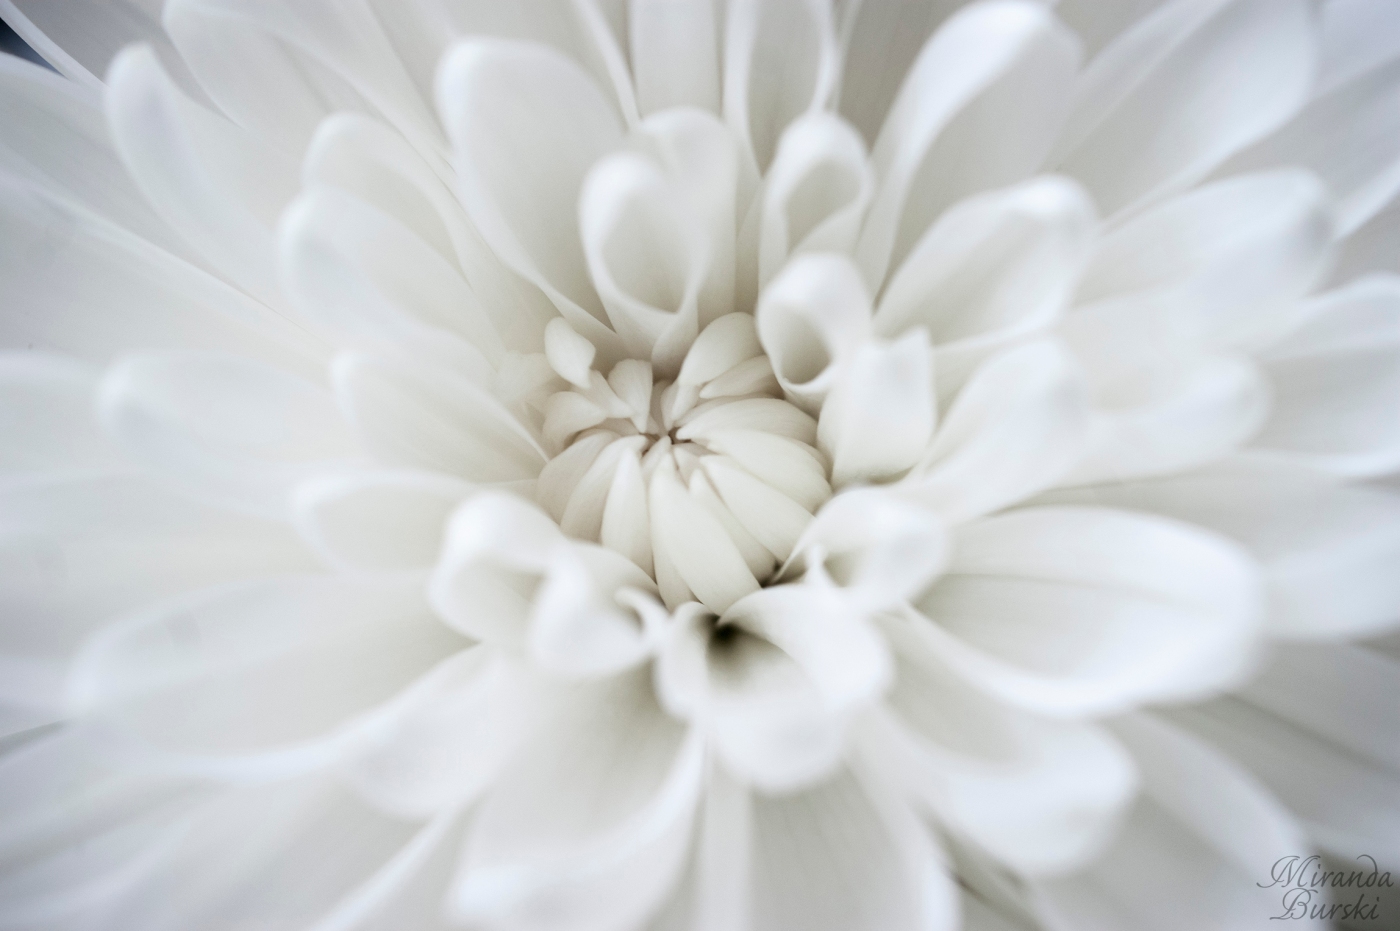 The centre of a poofy white flower